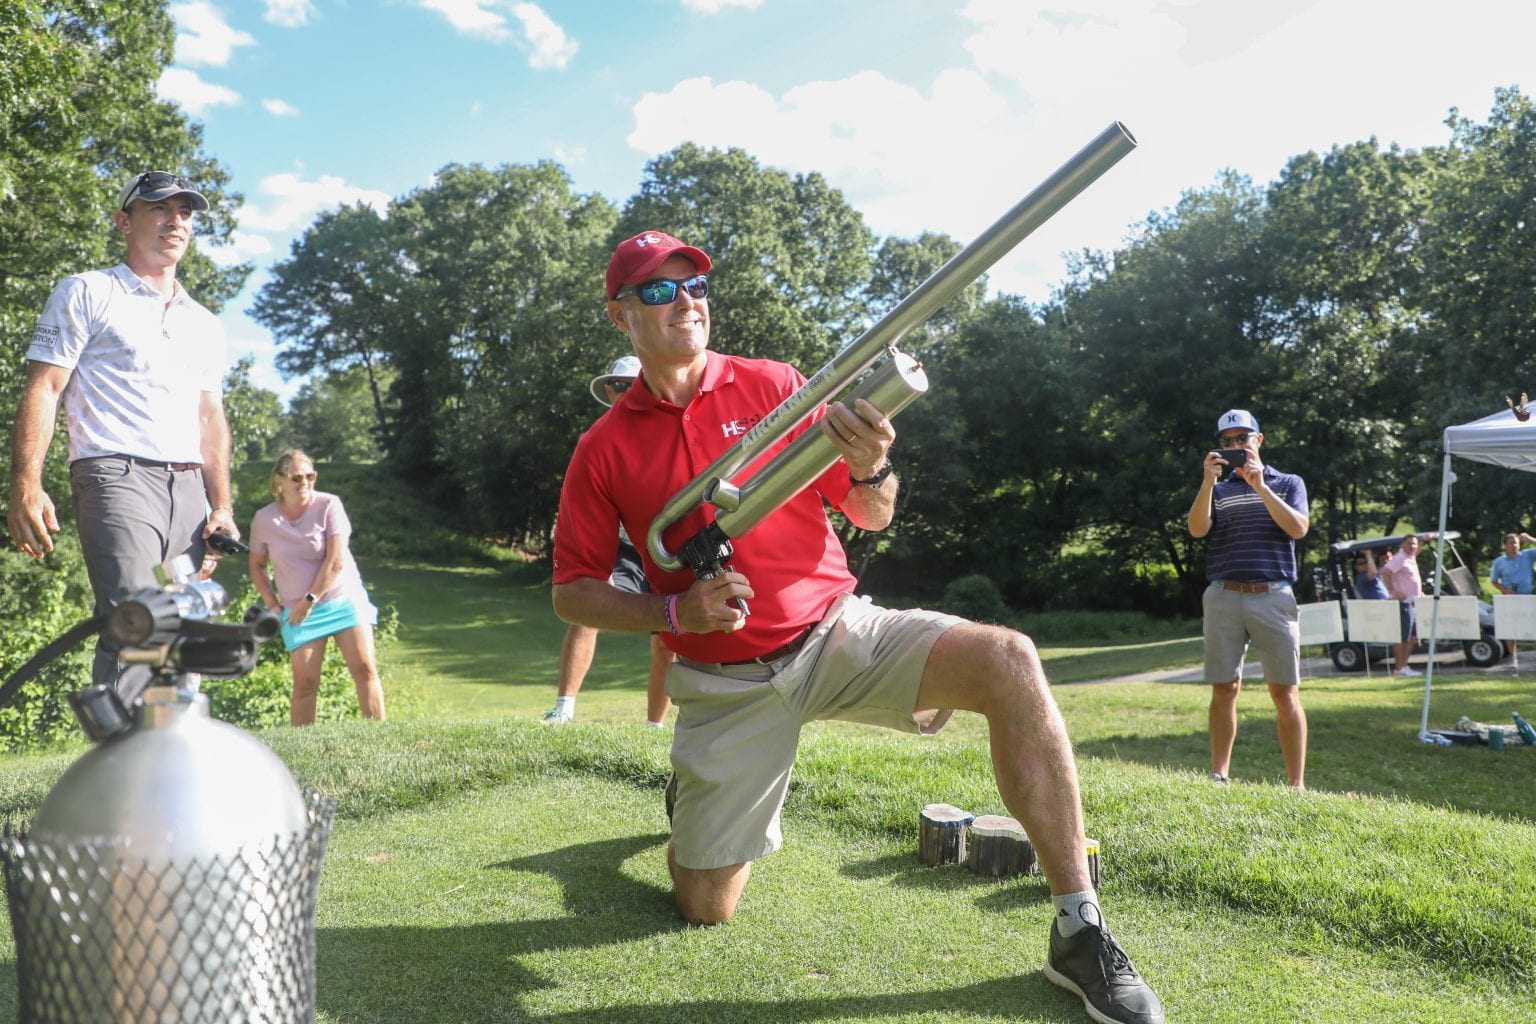 Golfer shooting air rifle at golf tourney. Photo by Joshua Ross